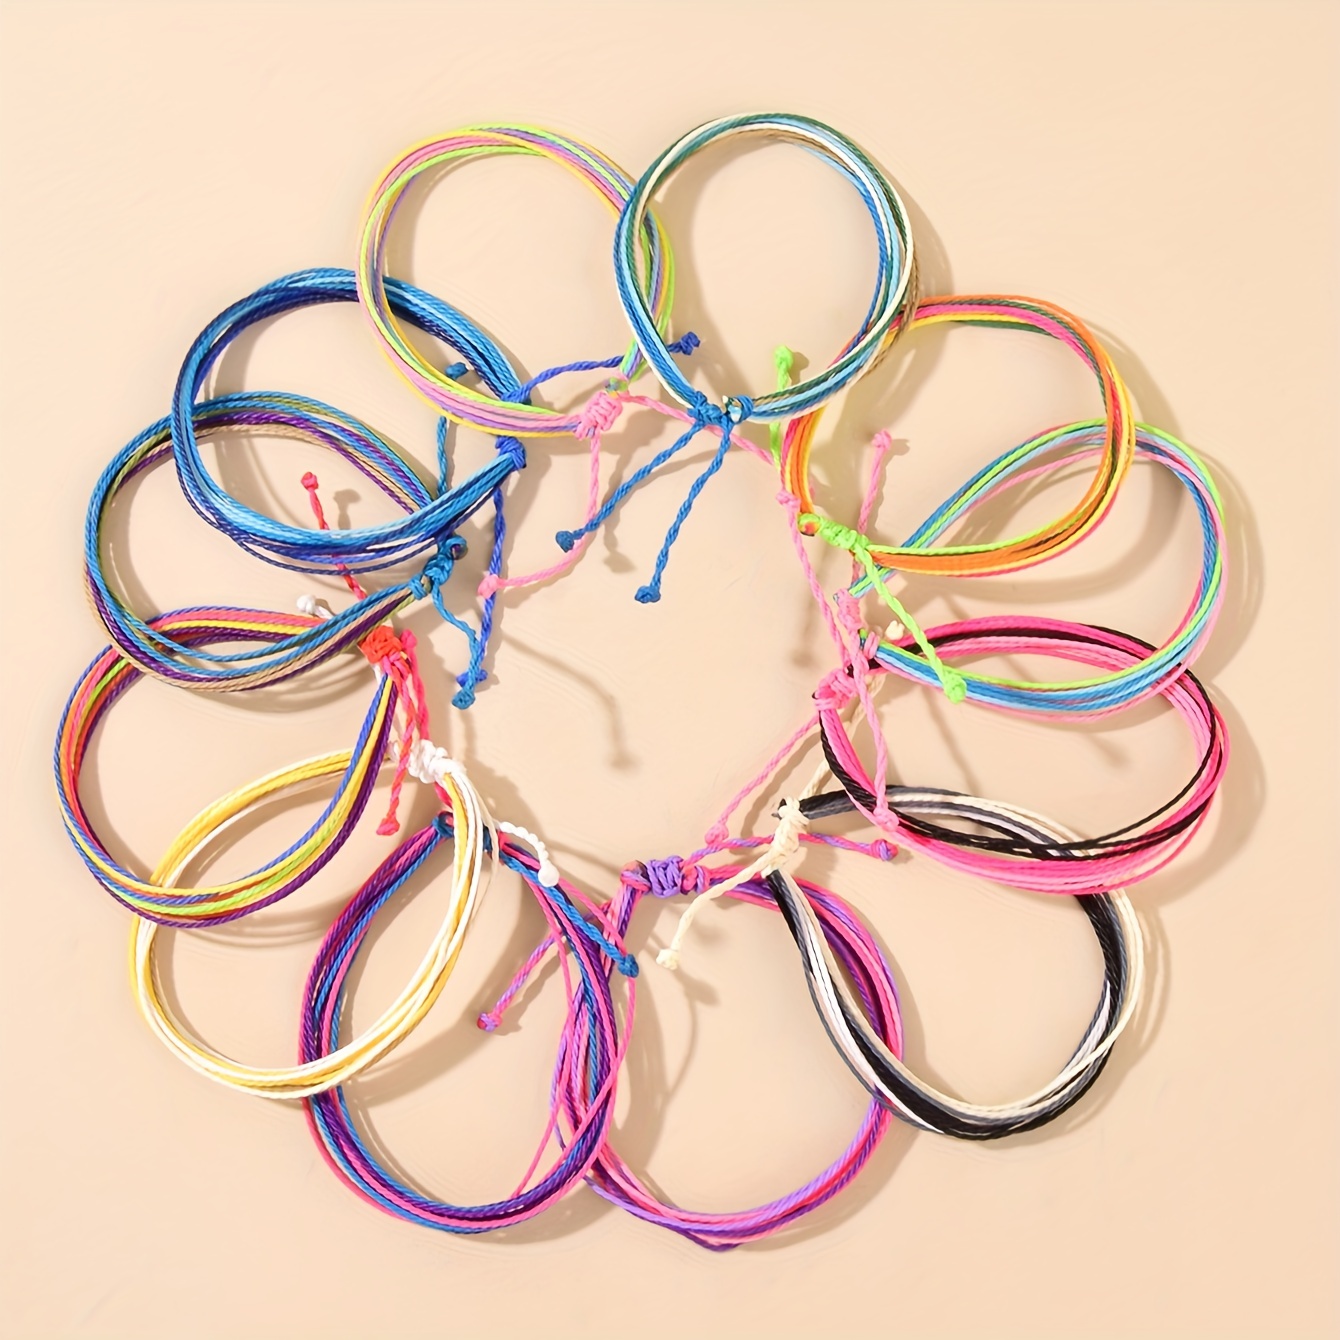 

12pc Colorful Braided Bracelet Set Adjustable Hand Rope Jewelry Set For Women Daily Wear